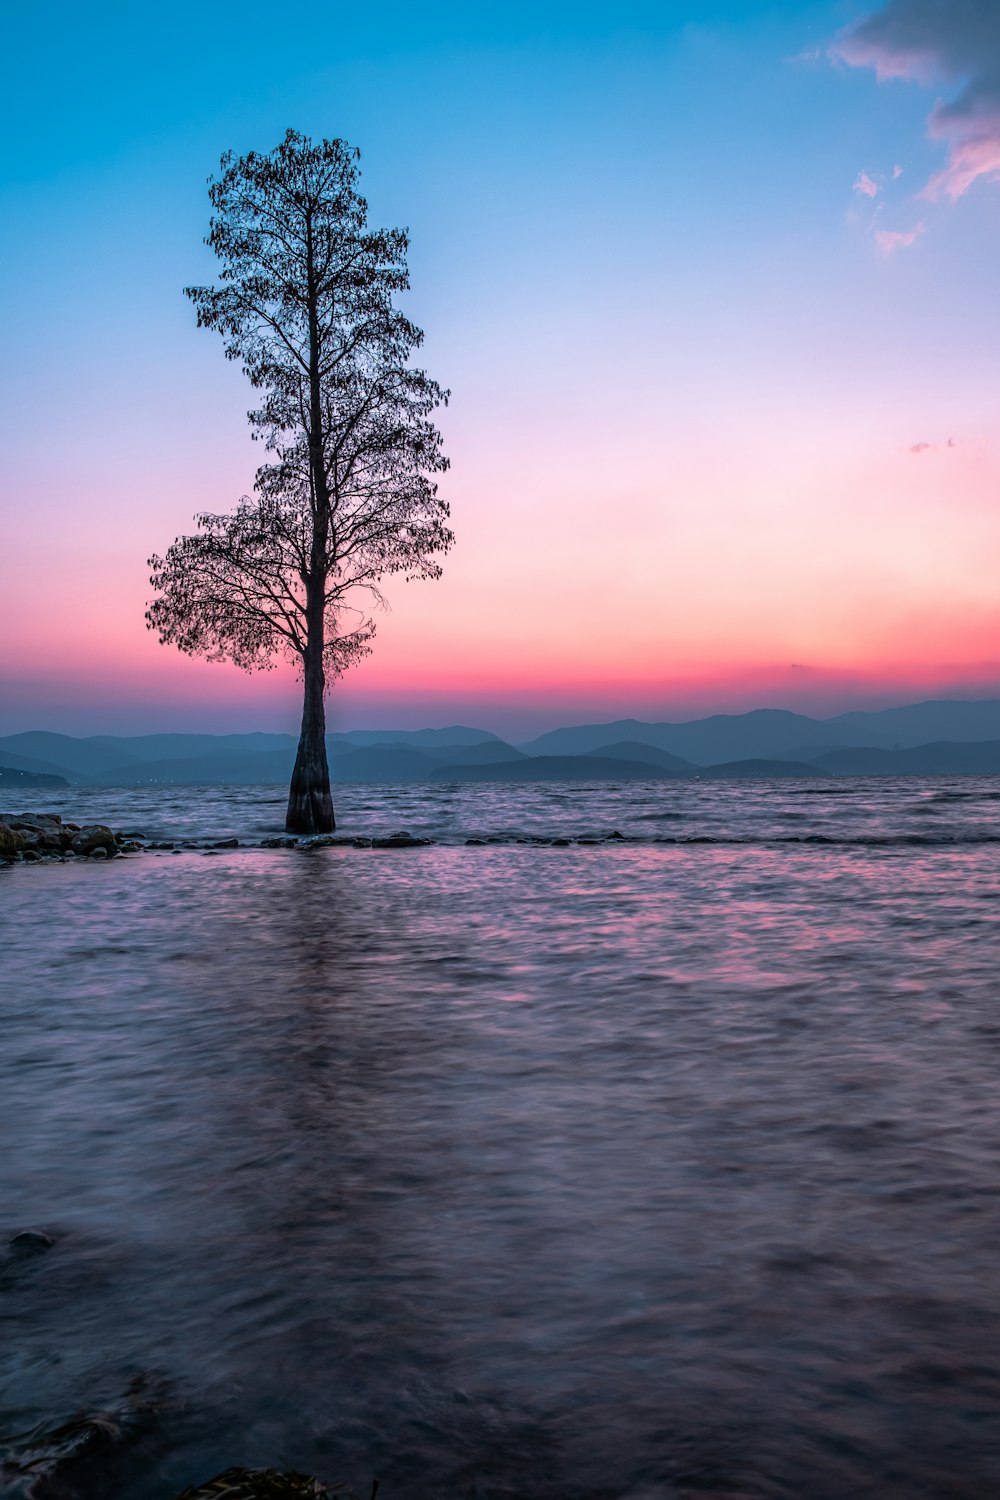 a lone tree in the middle of a body of water